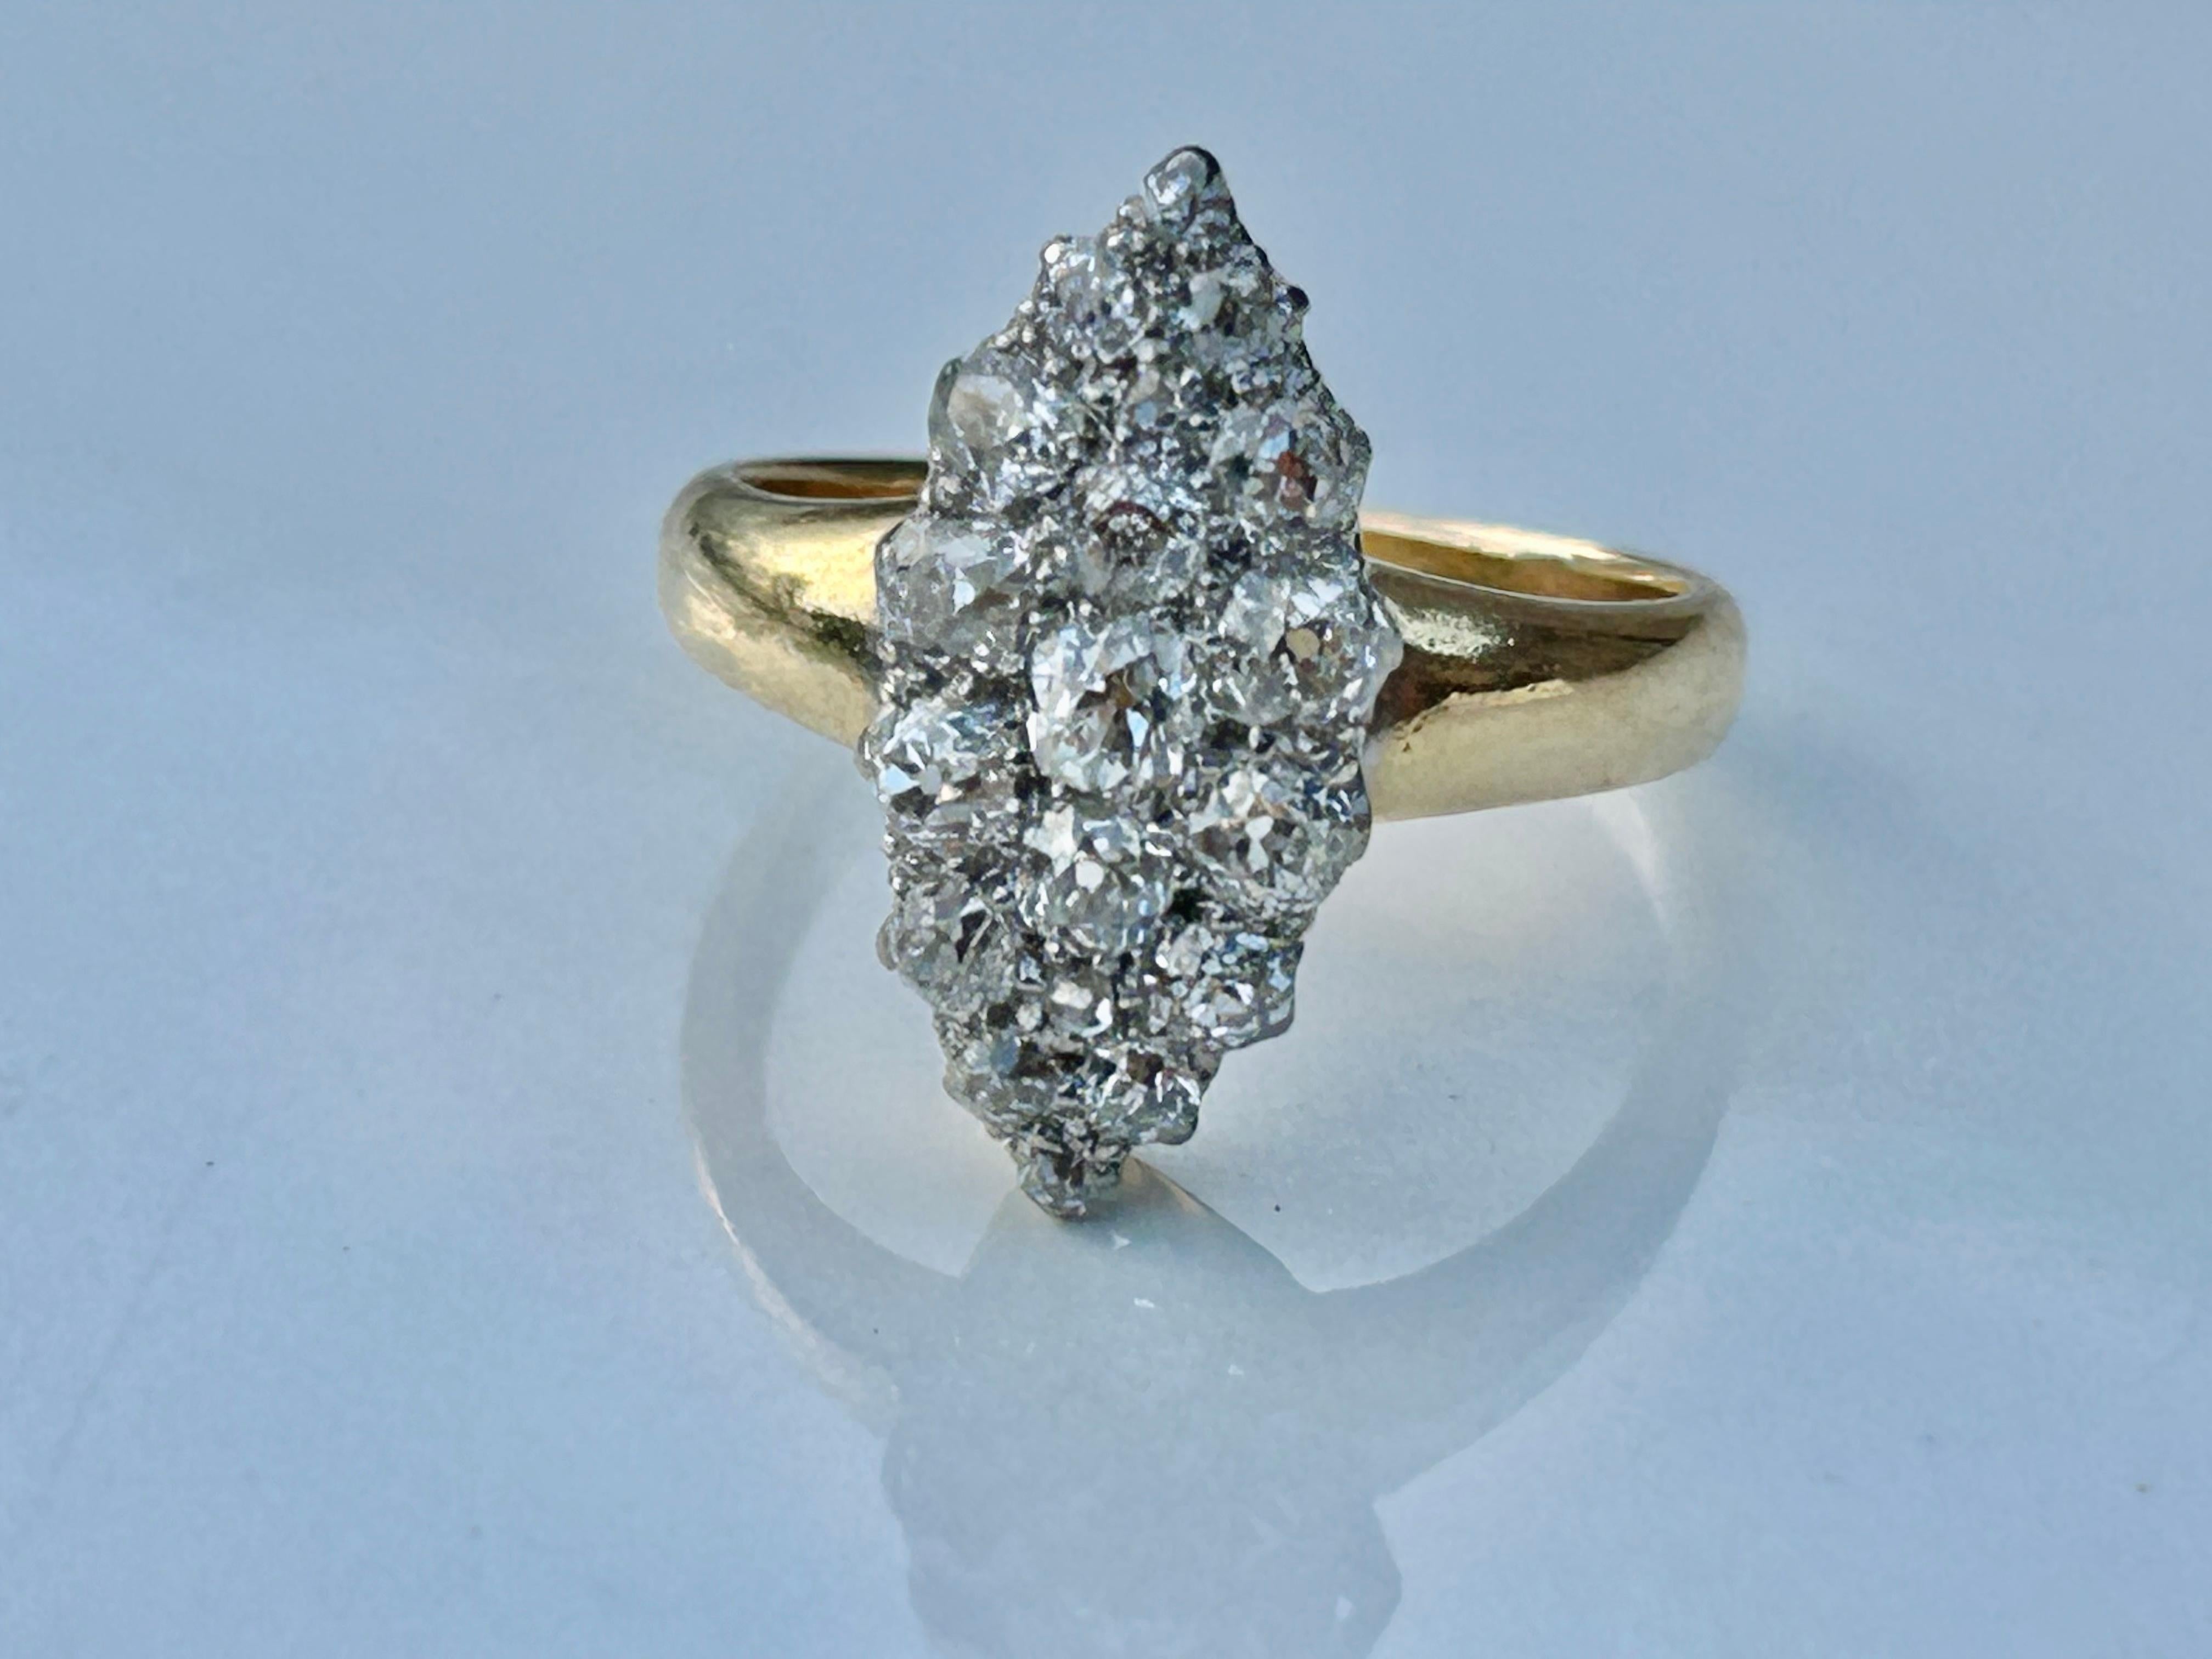 Stunning Nineteen (19) Old Mine Cut Diamonds clustered in a breathtaking Antique Victorian Navette ring. 
The ring is set with approximately 1.51 carats of Old Mine Cut Diamonds of SI1 - Si2 clarity, G-H Color.  These stones are tightly compact and